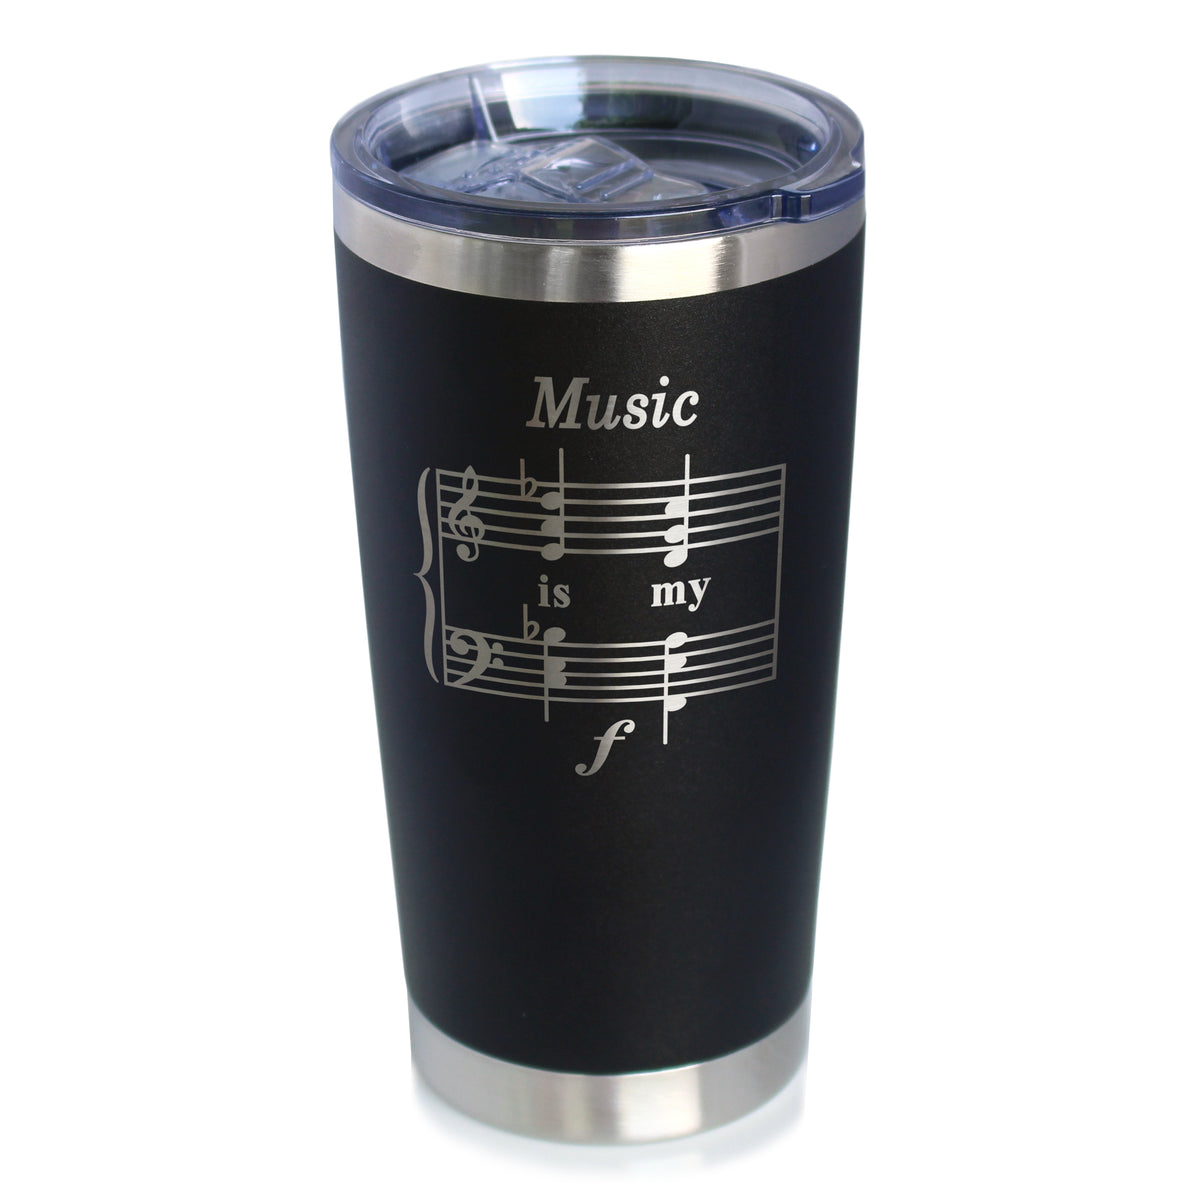 Music is My Forte - Insulated Coffee Tumbler Cup with Sliding Lid - Stainless Steel Mug - Unique Funny Musician Gifts and Musical Accessories